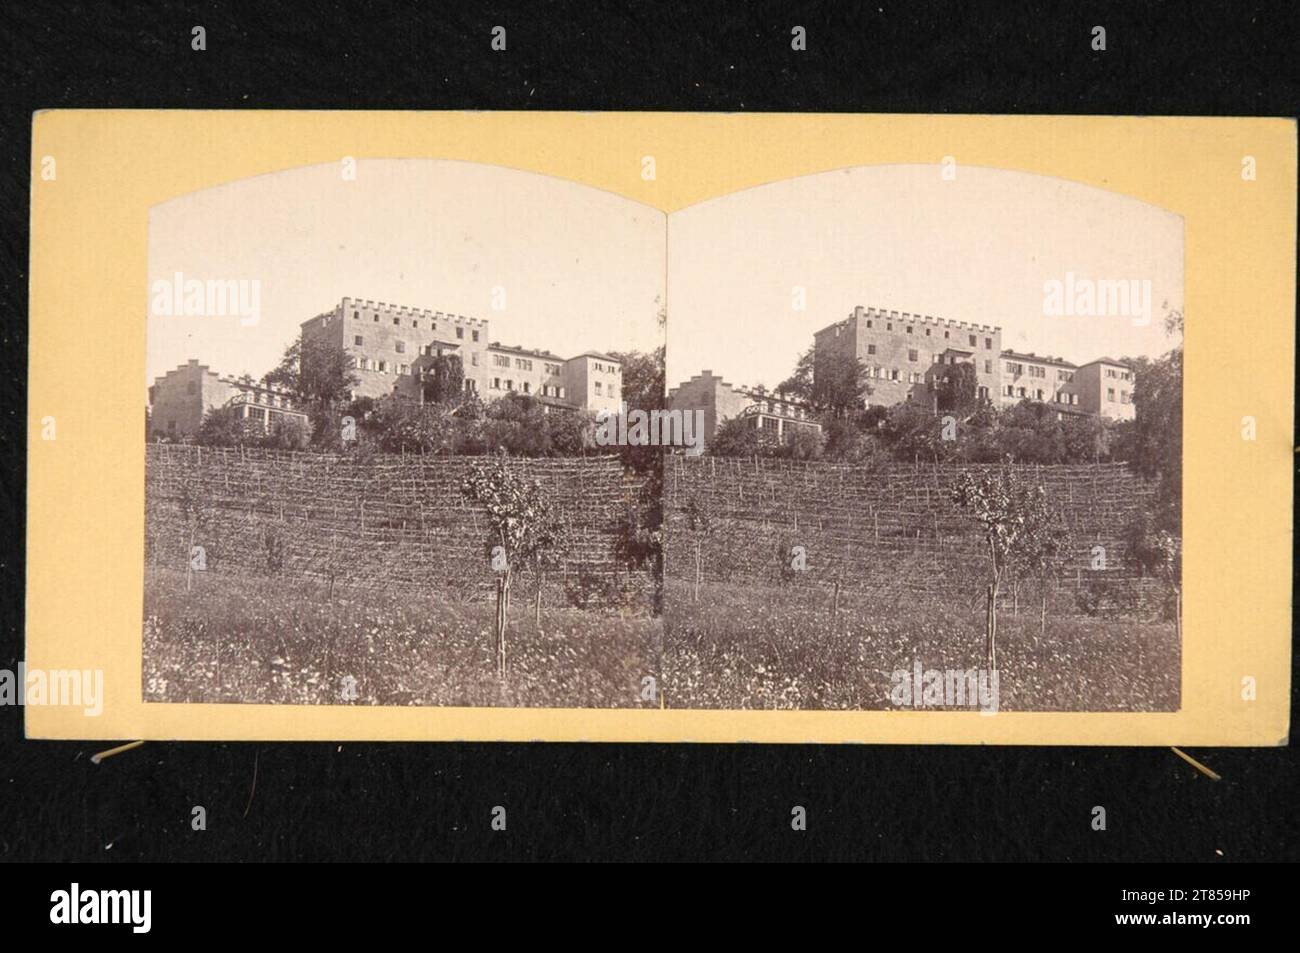 Peter Moosbrugger Neuberg Castle (today mostly Schlöss Trautmannsdorf gen.) In Obermais near Merano. Albumin paper, on the box box / stereo format Stock Photo